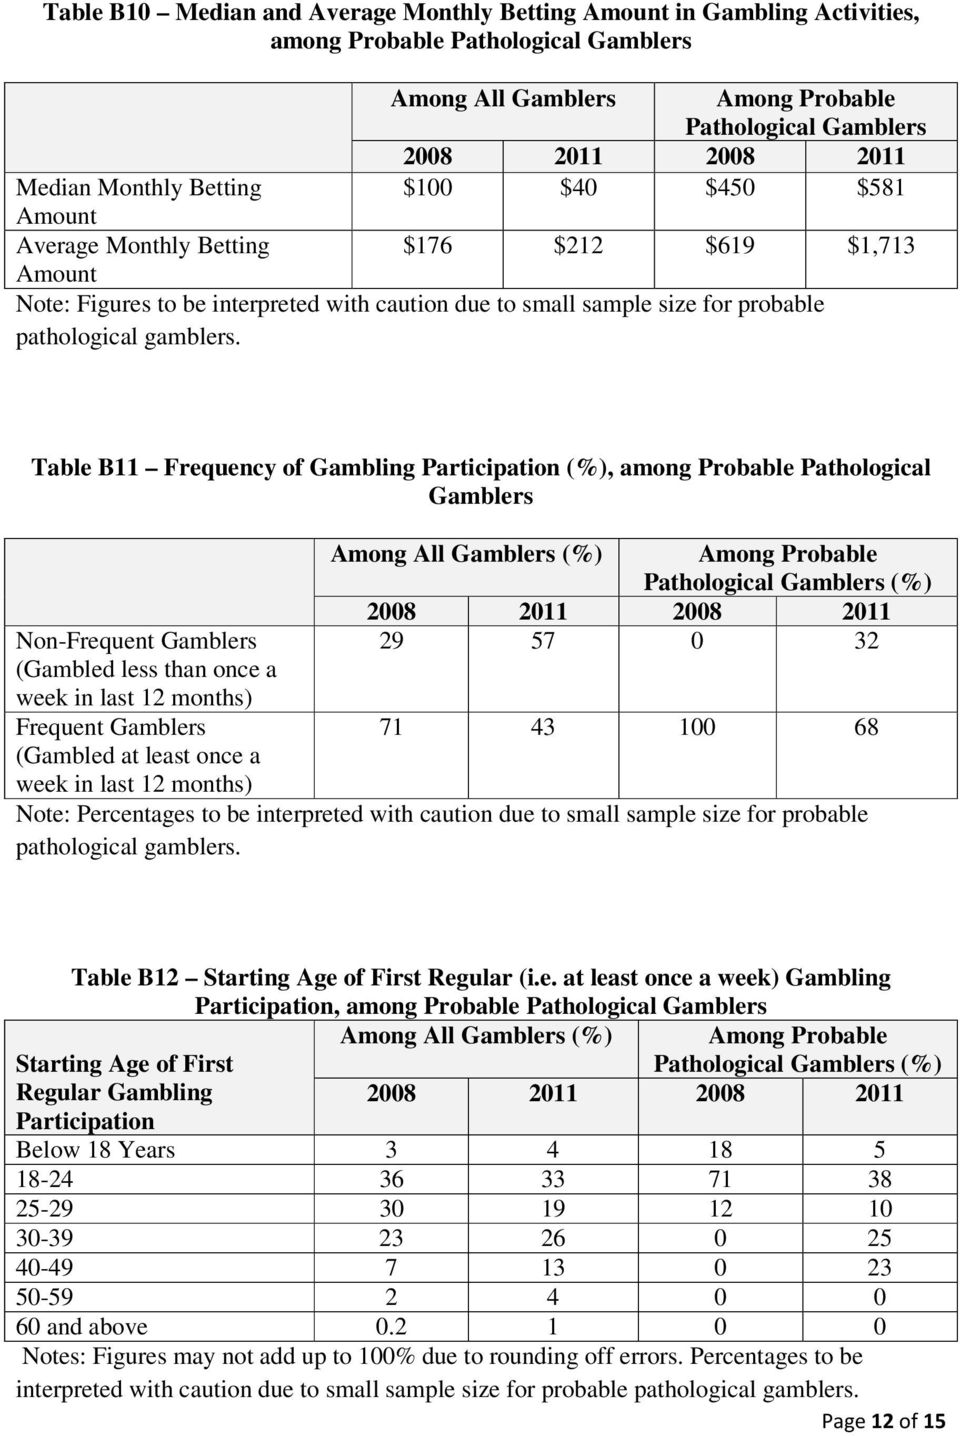 Table B11 Frequency of Gambling Participation, among Probable Pathological Gamblers Non-Frequent Gamblers (Gambled less than once a week in last 12 months) Frequent Gamblers (Gambled at least once a